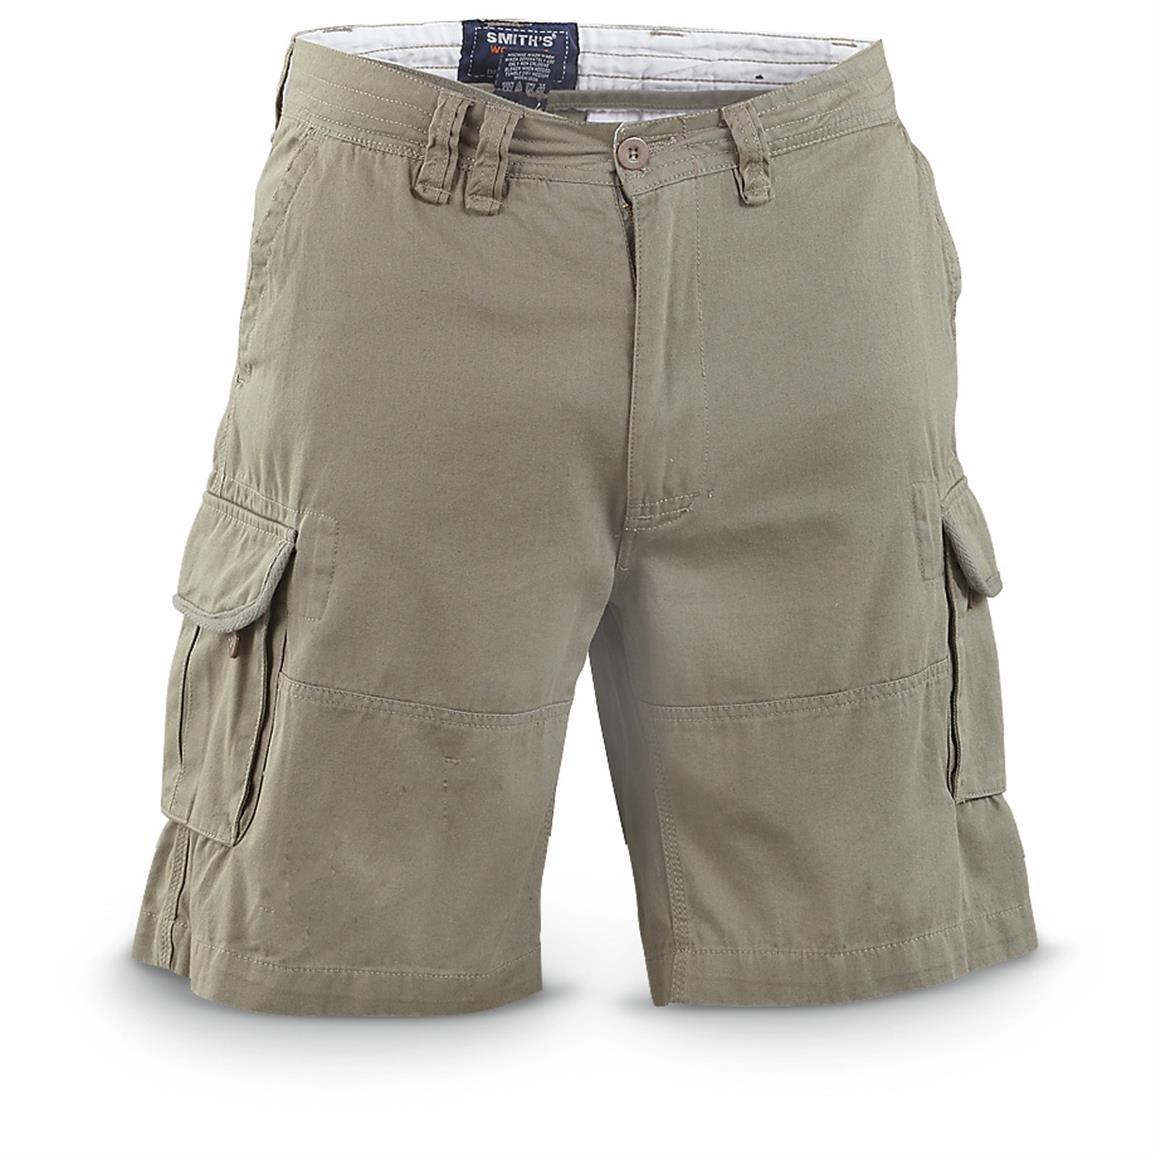 Smith's® Cargo Work Shorts - 615585, Shorts at Sportsman's Guide